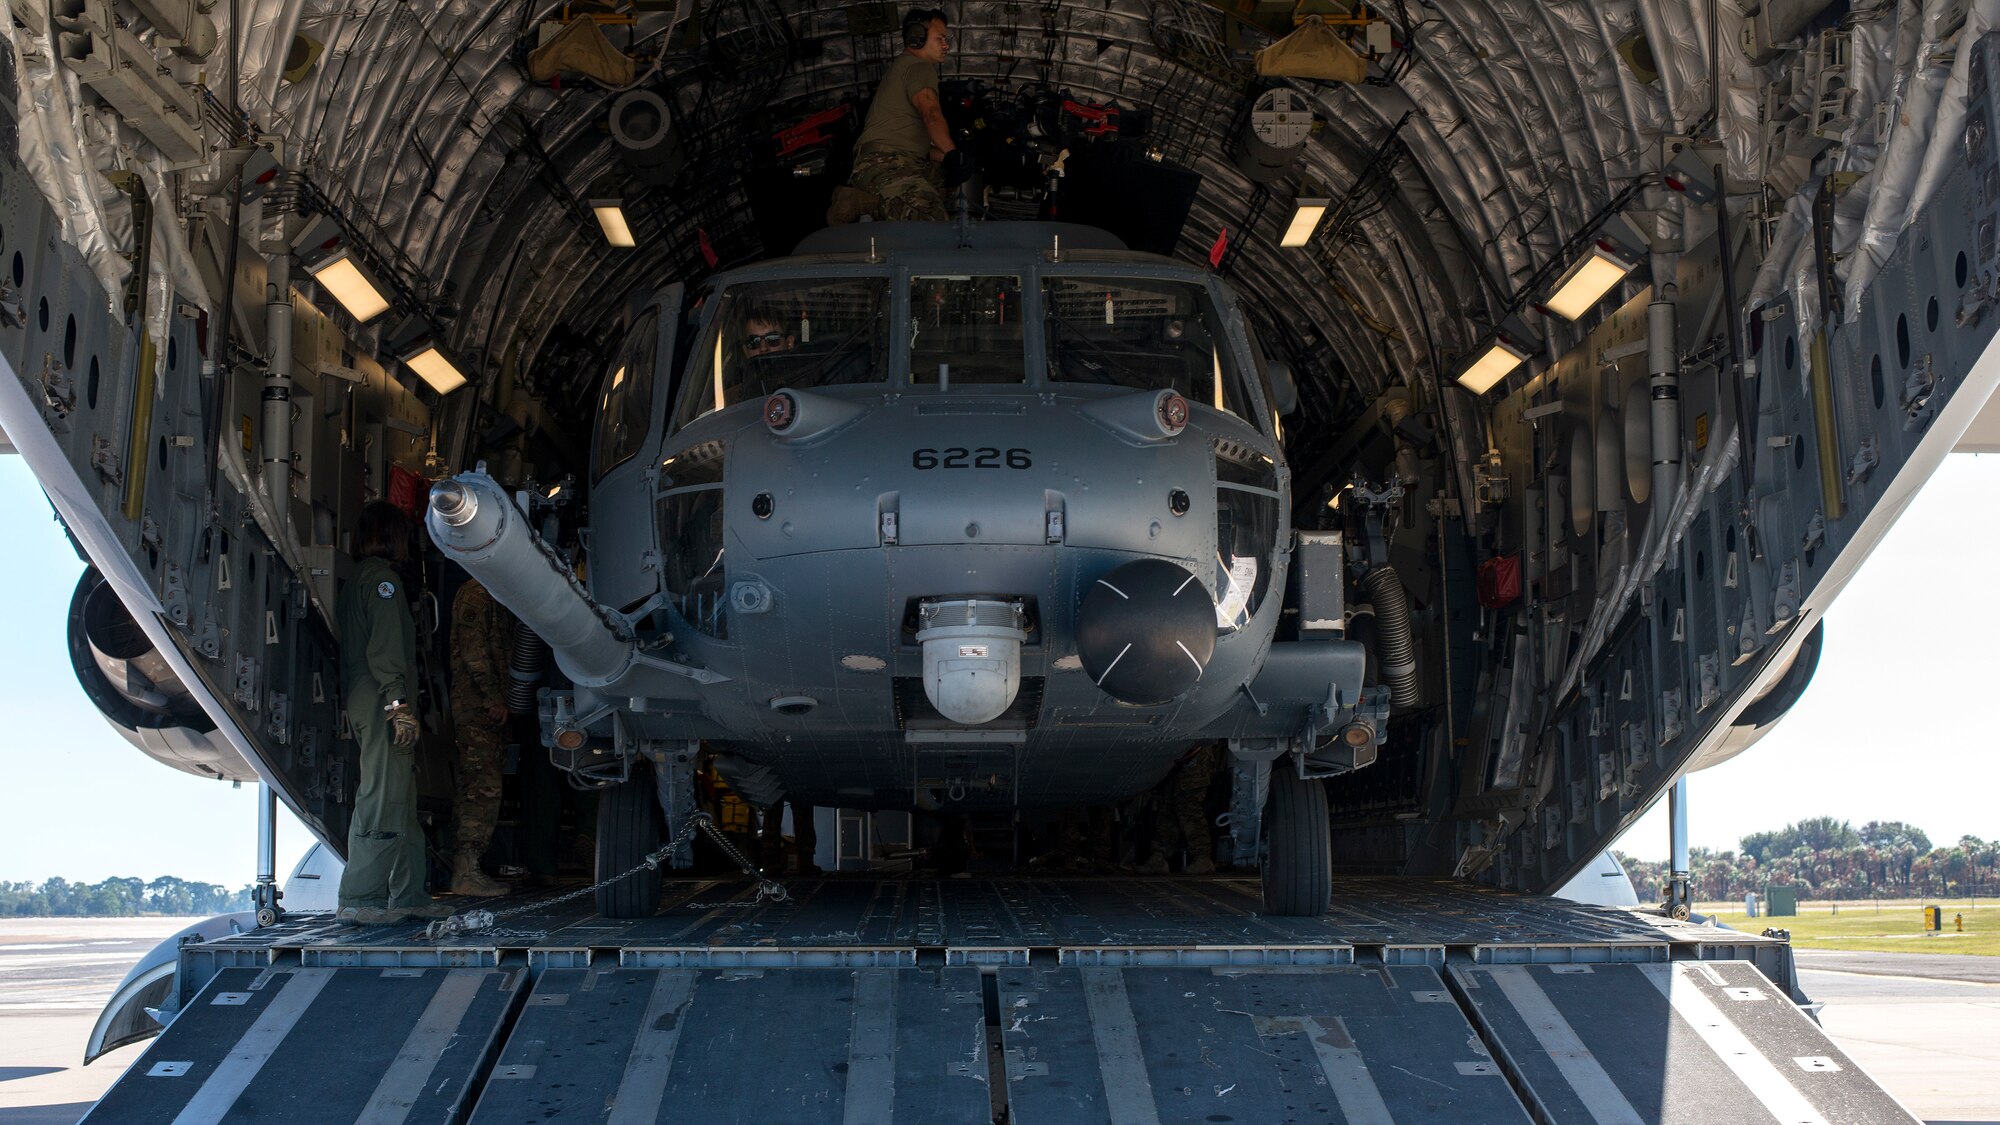 An HH-60 Pave Hawk helicopter assigned to the 305th Rescue Squadron (RQS), Davis-Monthan Air Force Base, Ariz., sits inside a C-17 Globemaster III assigned to the 436th Airlift Wing, Dover Air Force Base, Dela., at MacDill Air Force Base, Fla., Nov. 20, 2019.